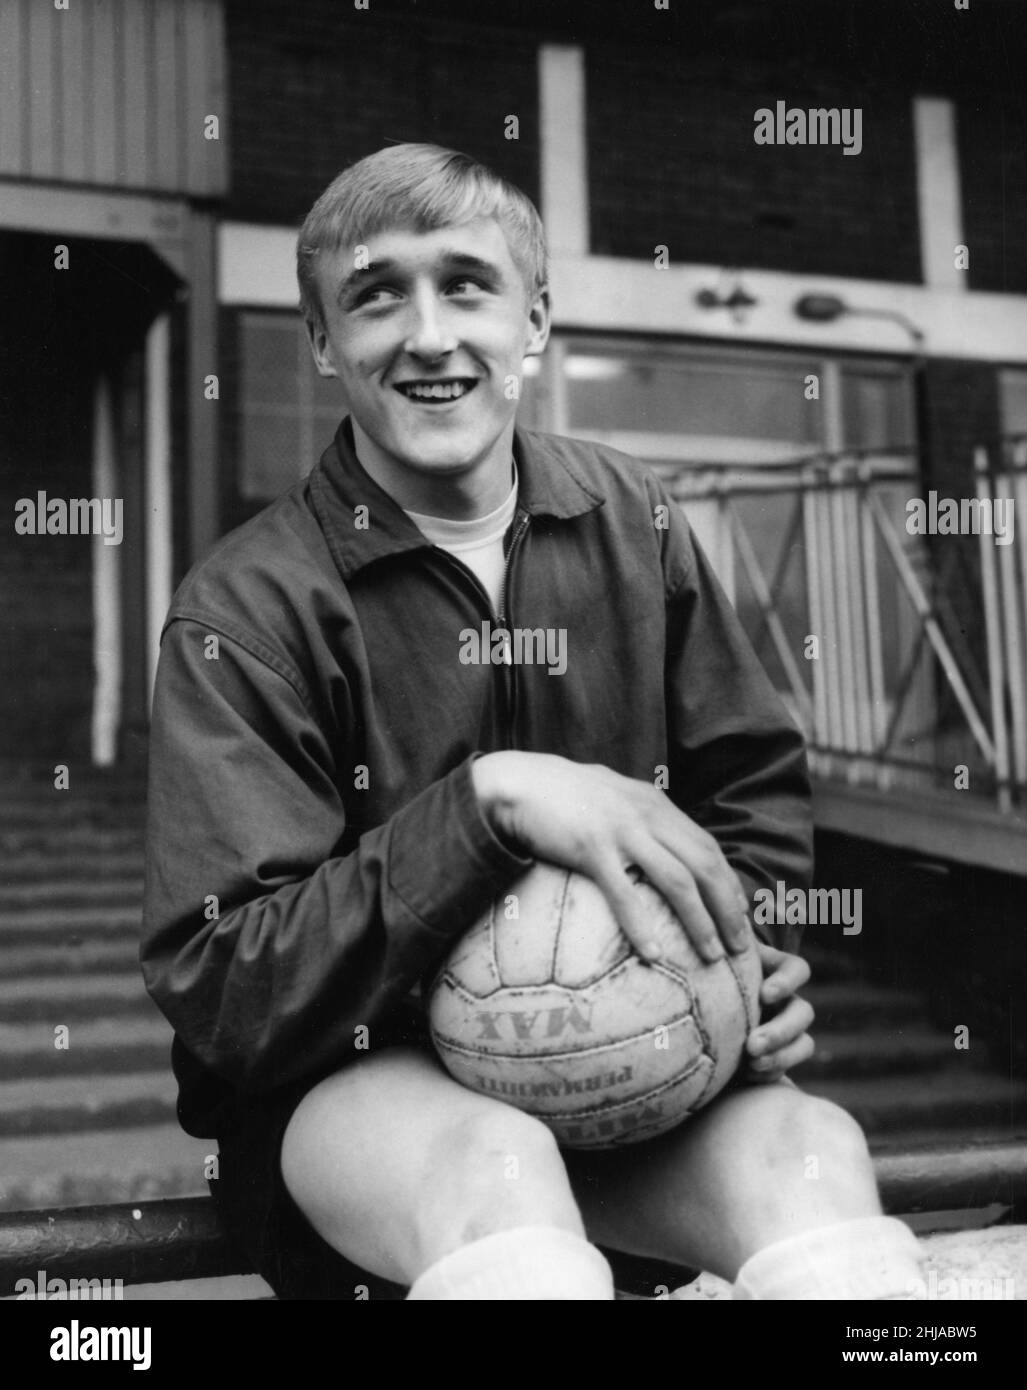 Derek Parkin fullback aged 16 year-old prepares to make his first senior appearance for Huddersfield Town against Bury, November 1964. *** Local Caption *** football player Stock Photo